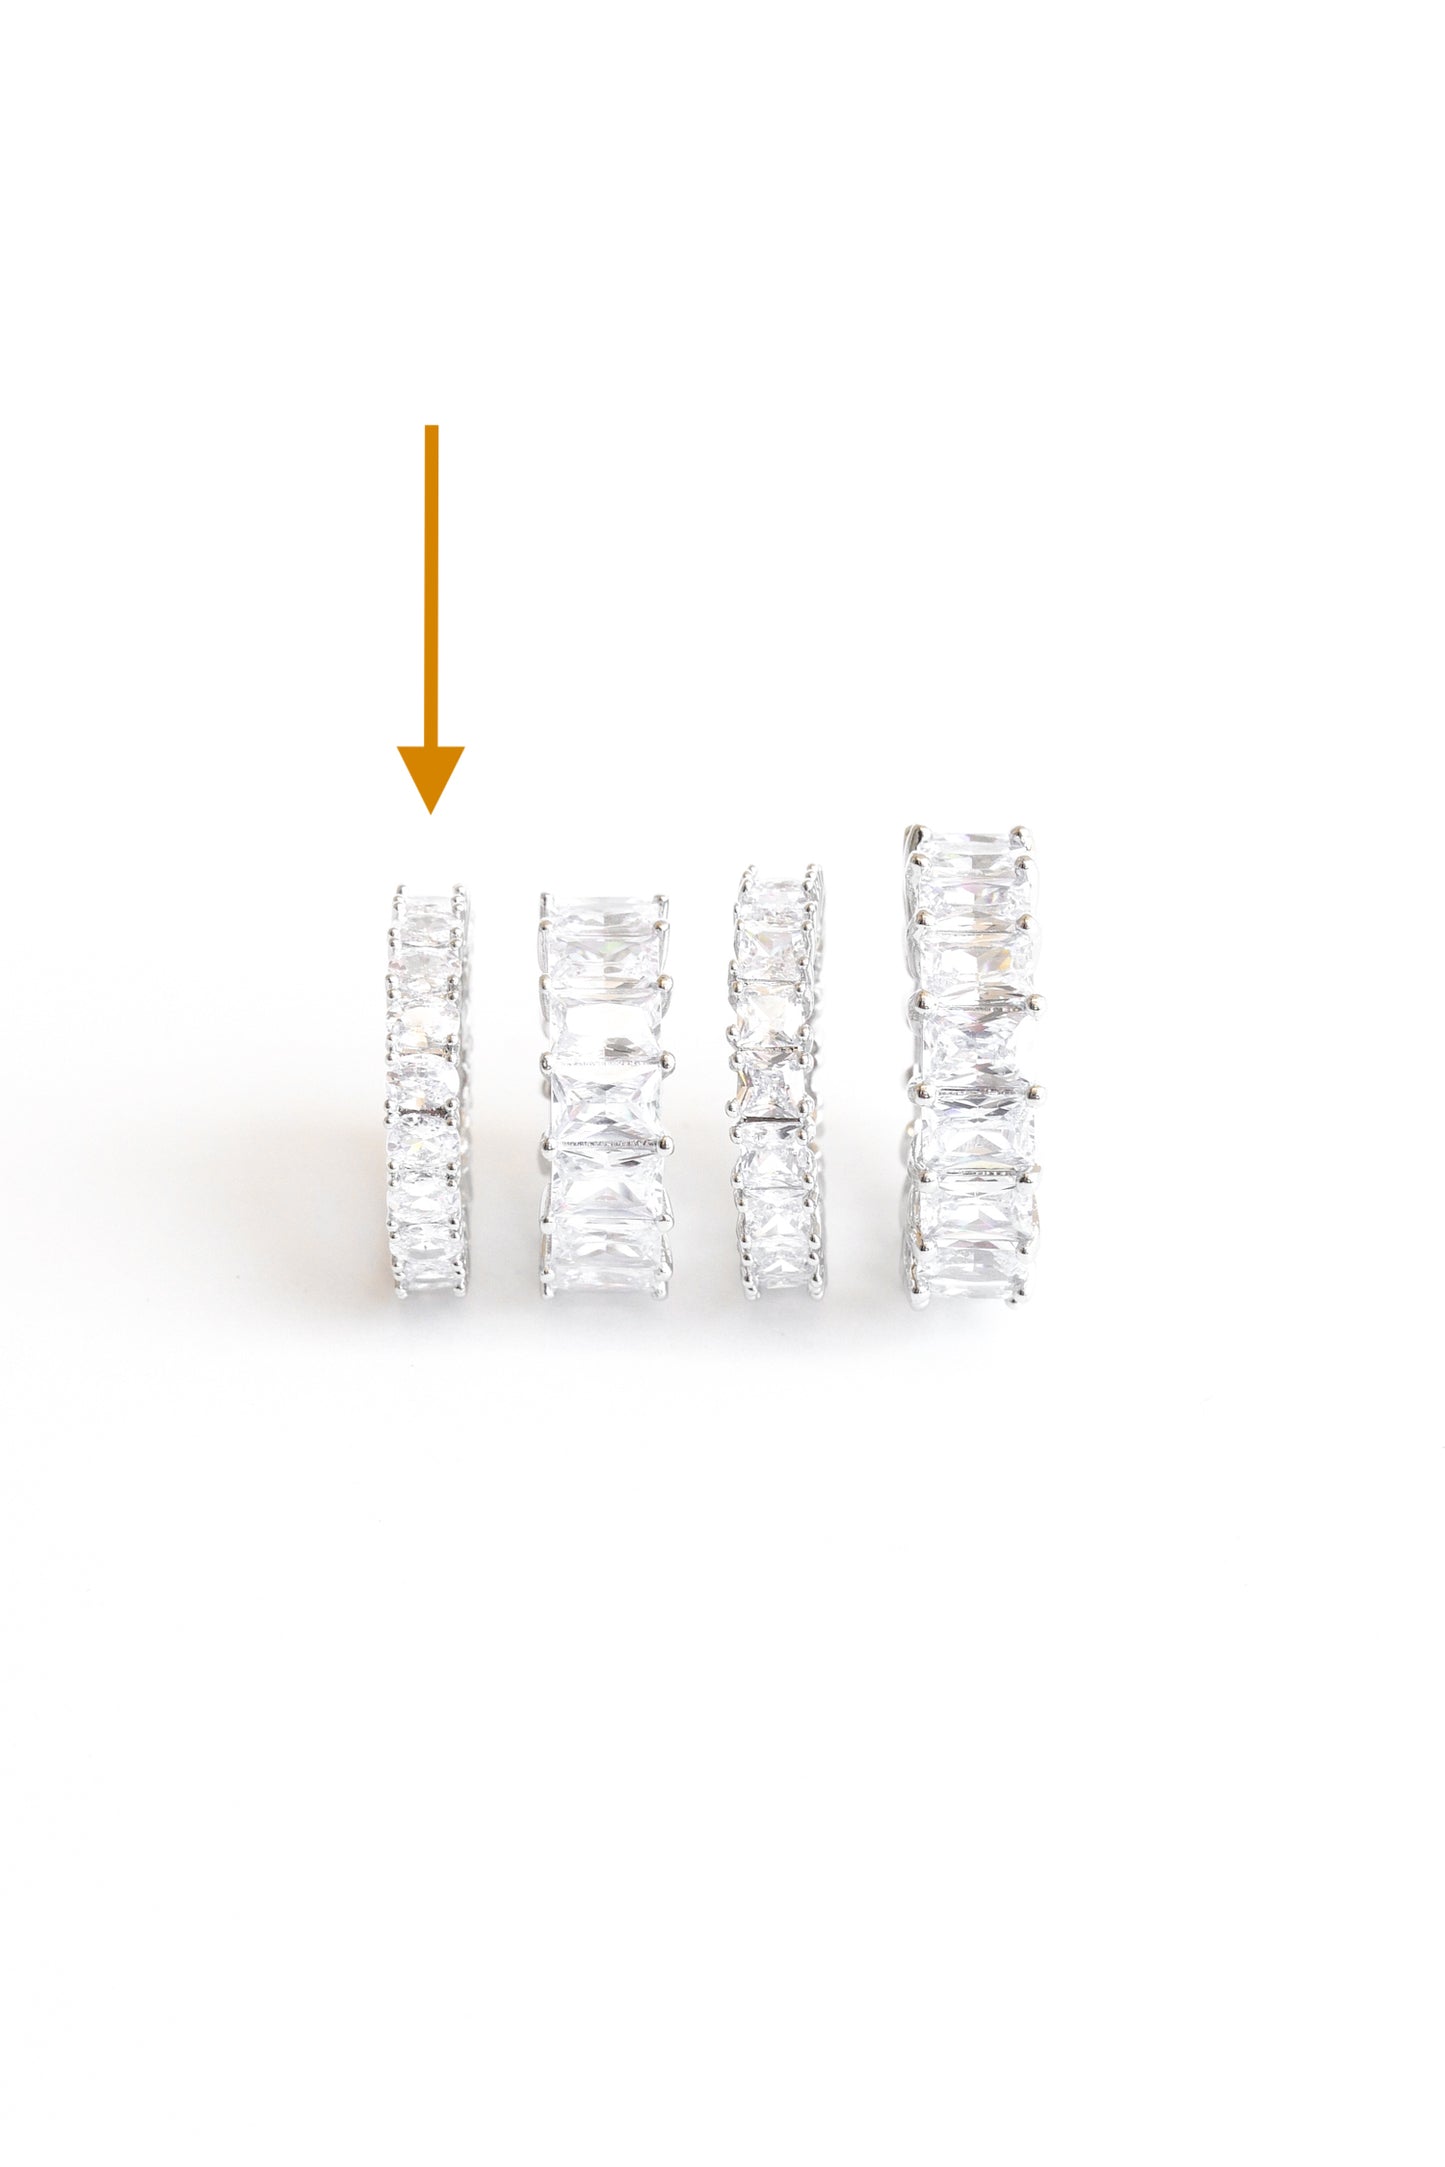 arrow pointing to Oval Amor band ring with other crystal rings against a white backdrop